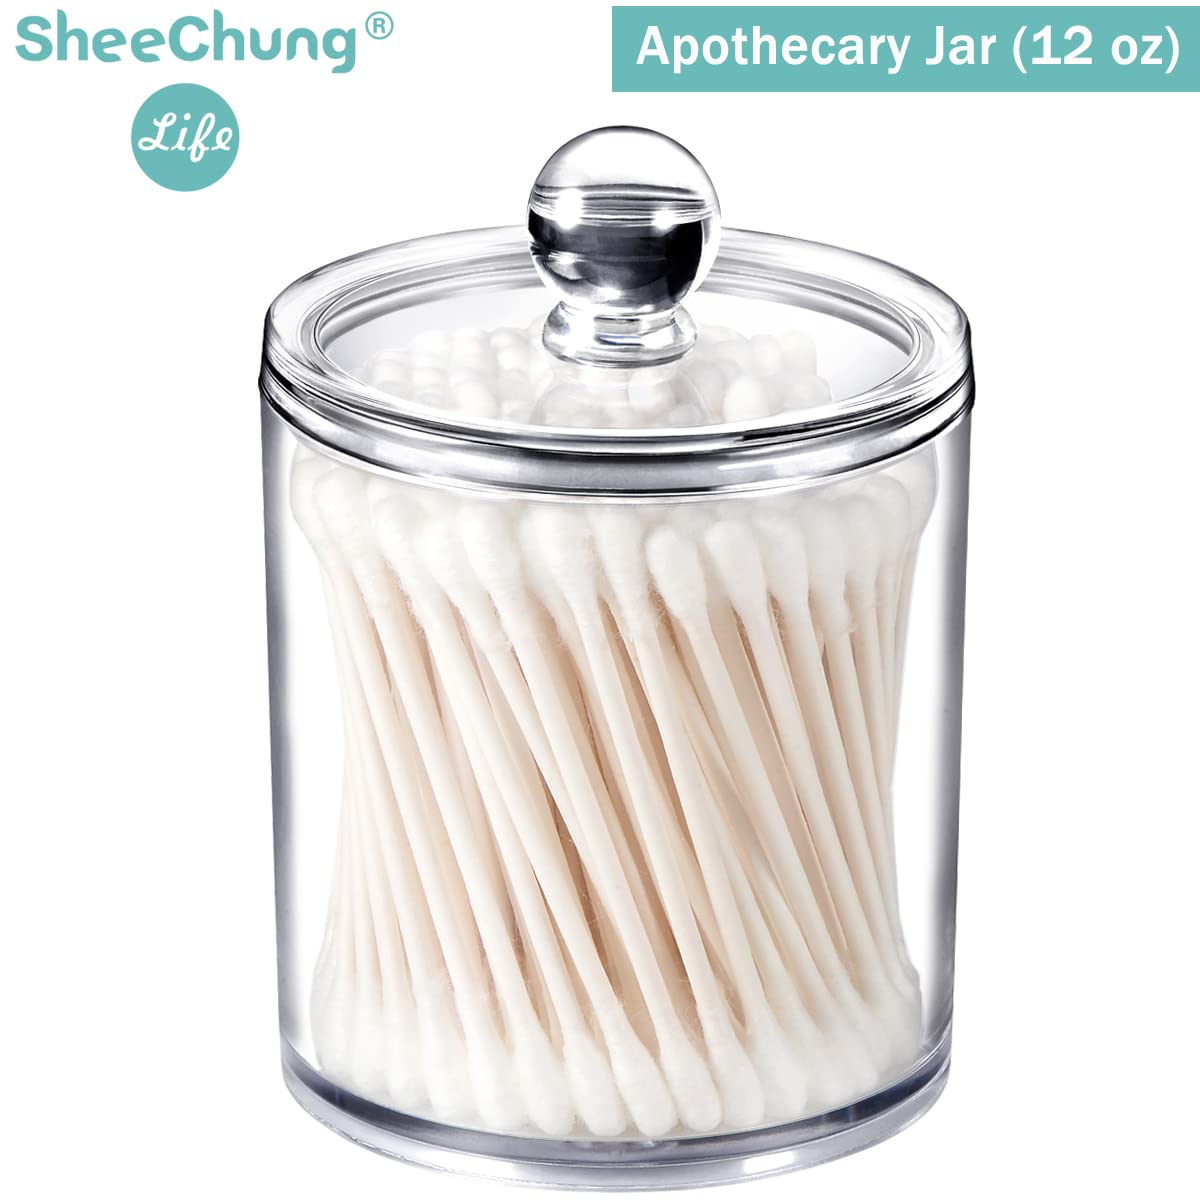 6 Pack of 12 Oz. Qtip Dispenser Apothecary Jars Bathroom with Labels - Holder Storage Canister Clear Plastic Acrylic Jar for Cotton Ball,Cotton Swab,Cotton Rounds,Floss Picks, Hair Clips (Clear)